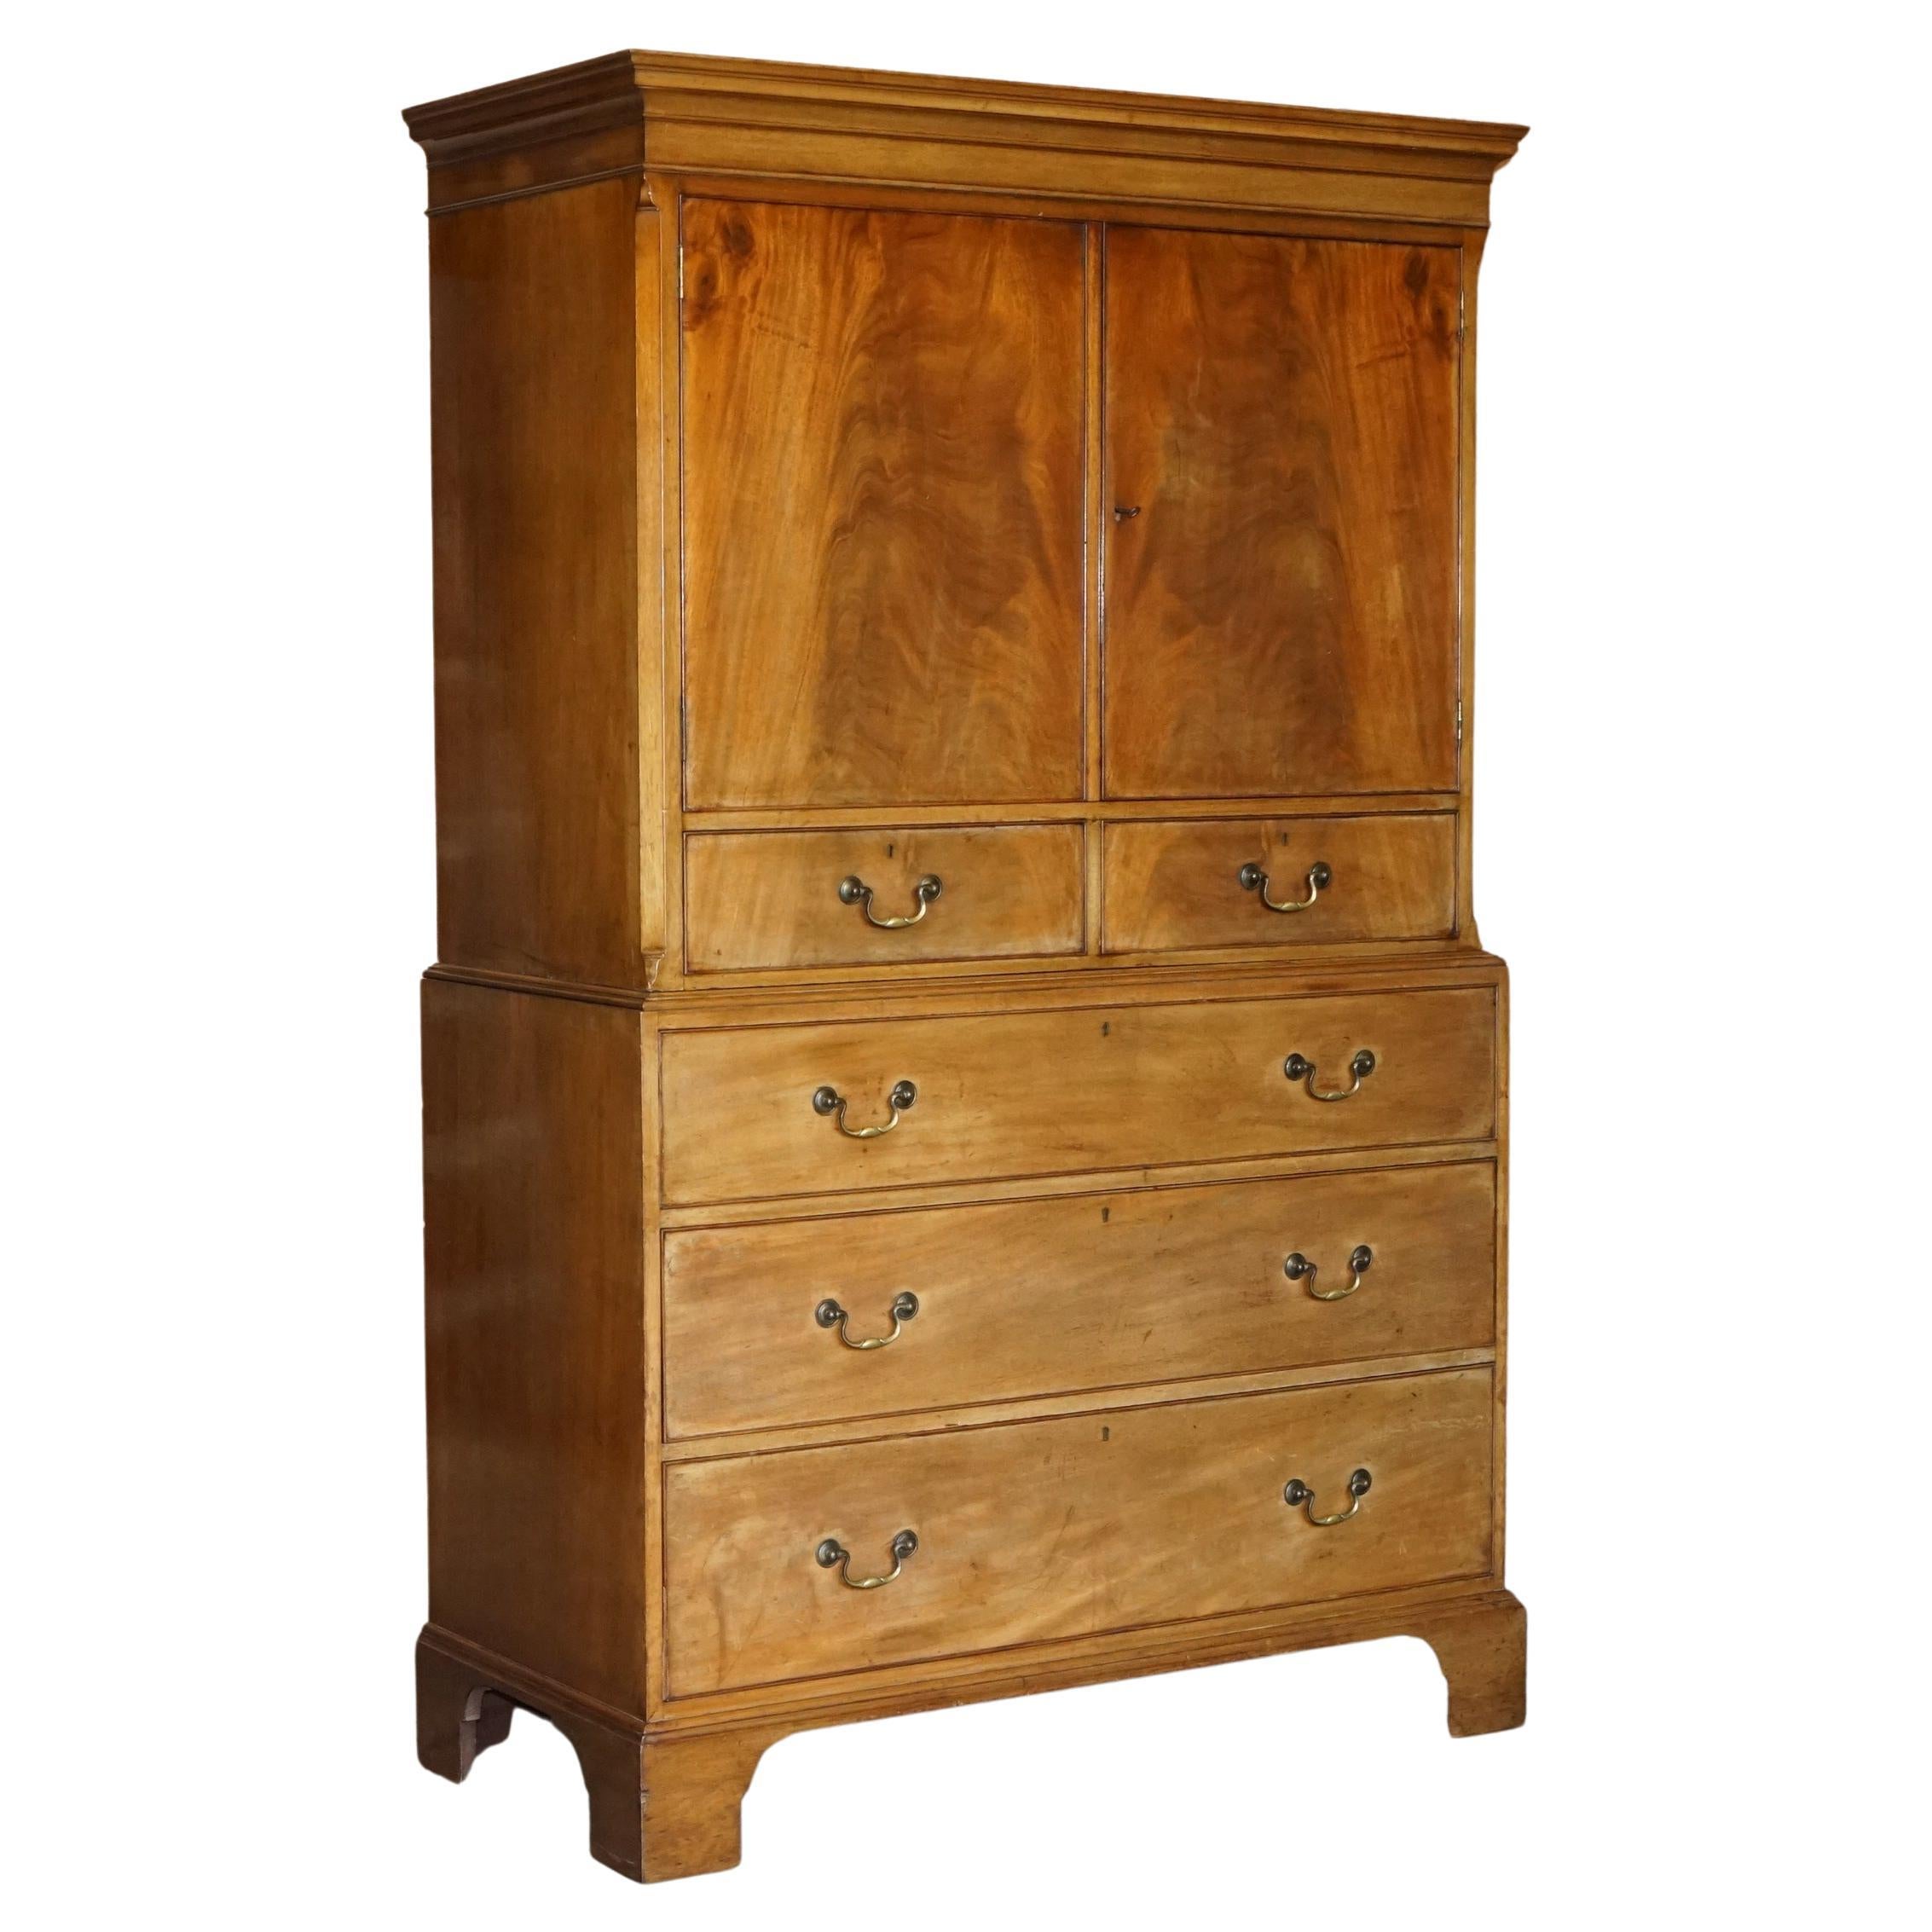 Antique Howard & Son's Berners Street Hardwood Linen Press Chest of Drawers For Sale